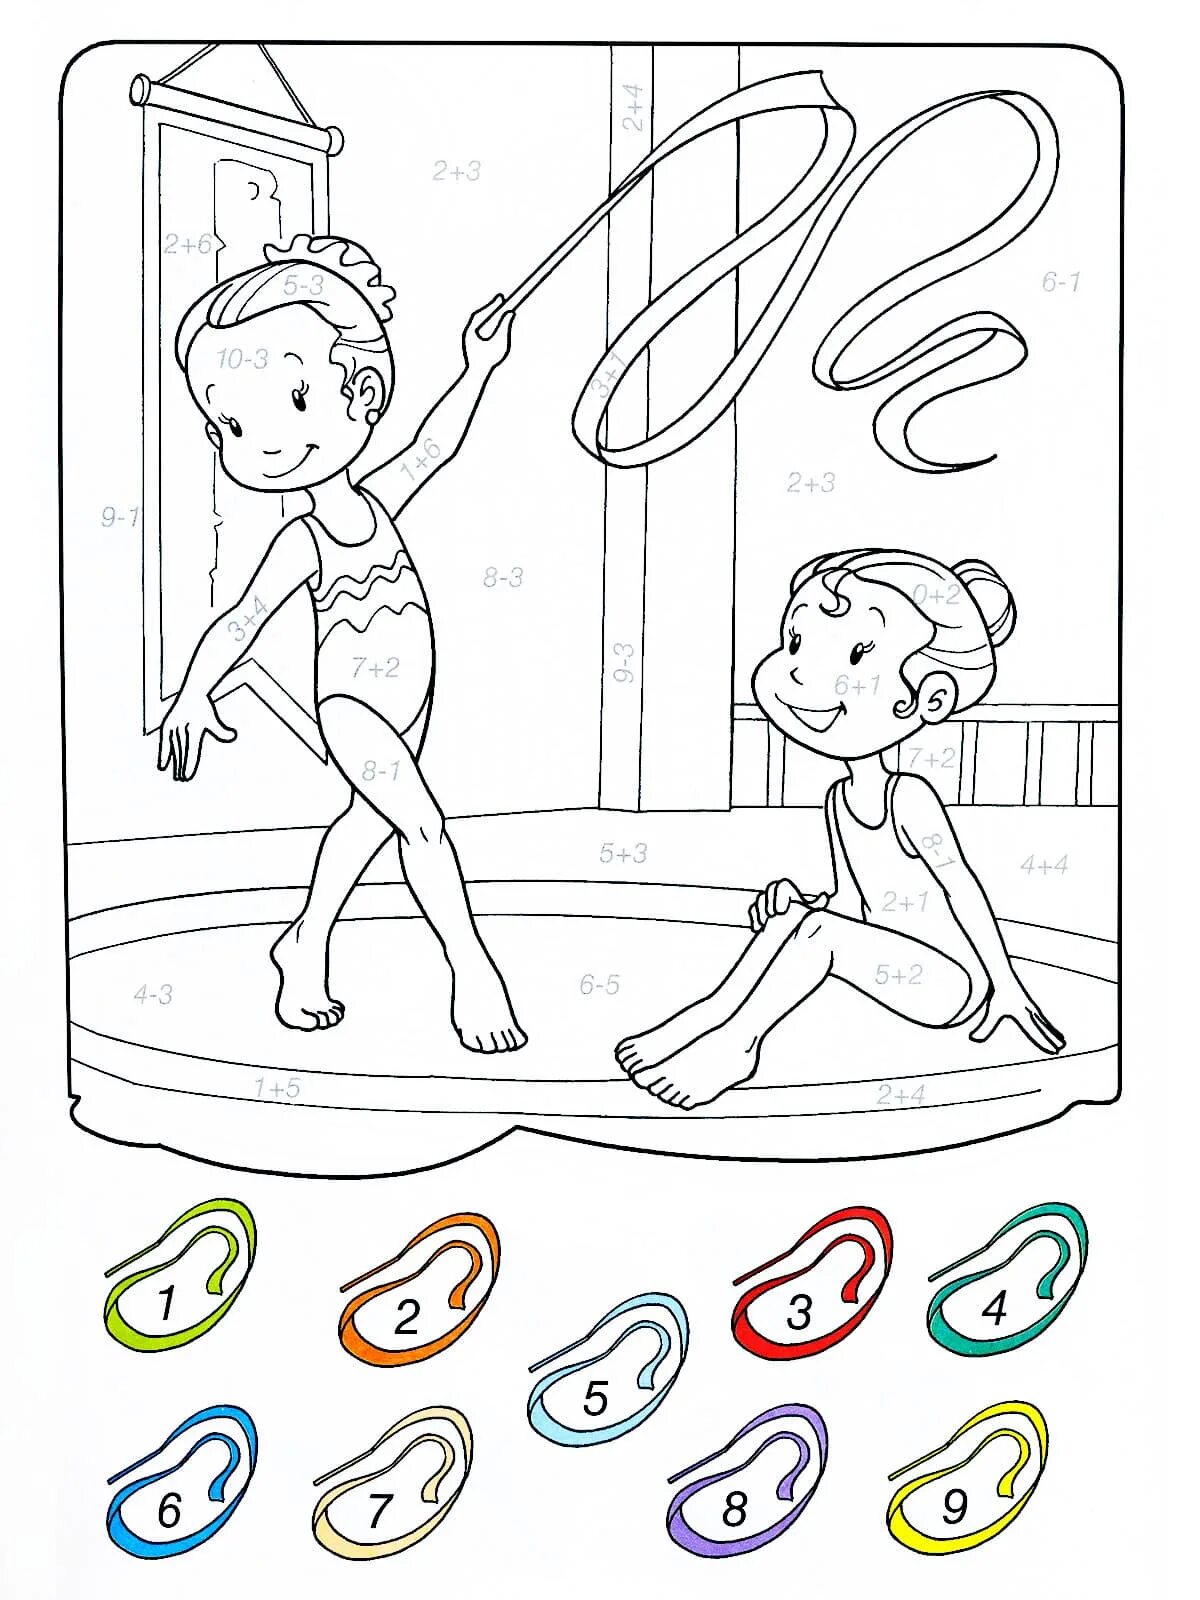 Innovative sports coloring book for 5-6 year olds